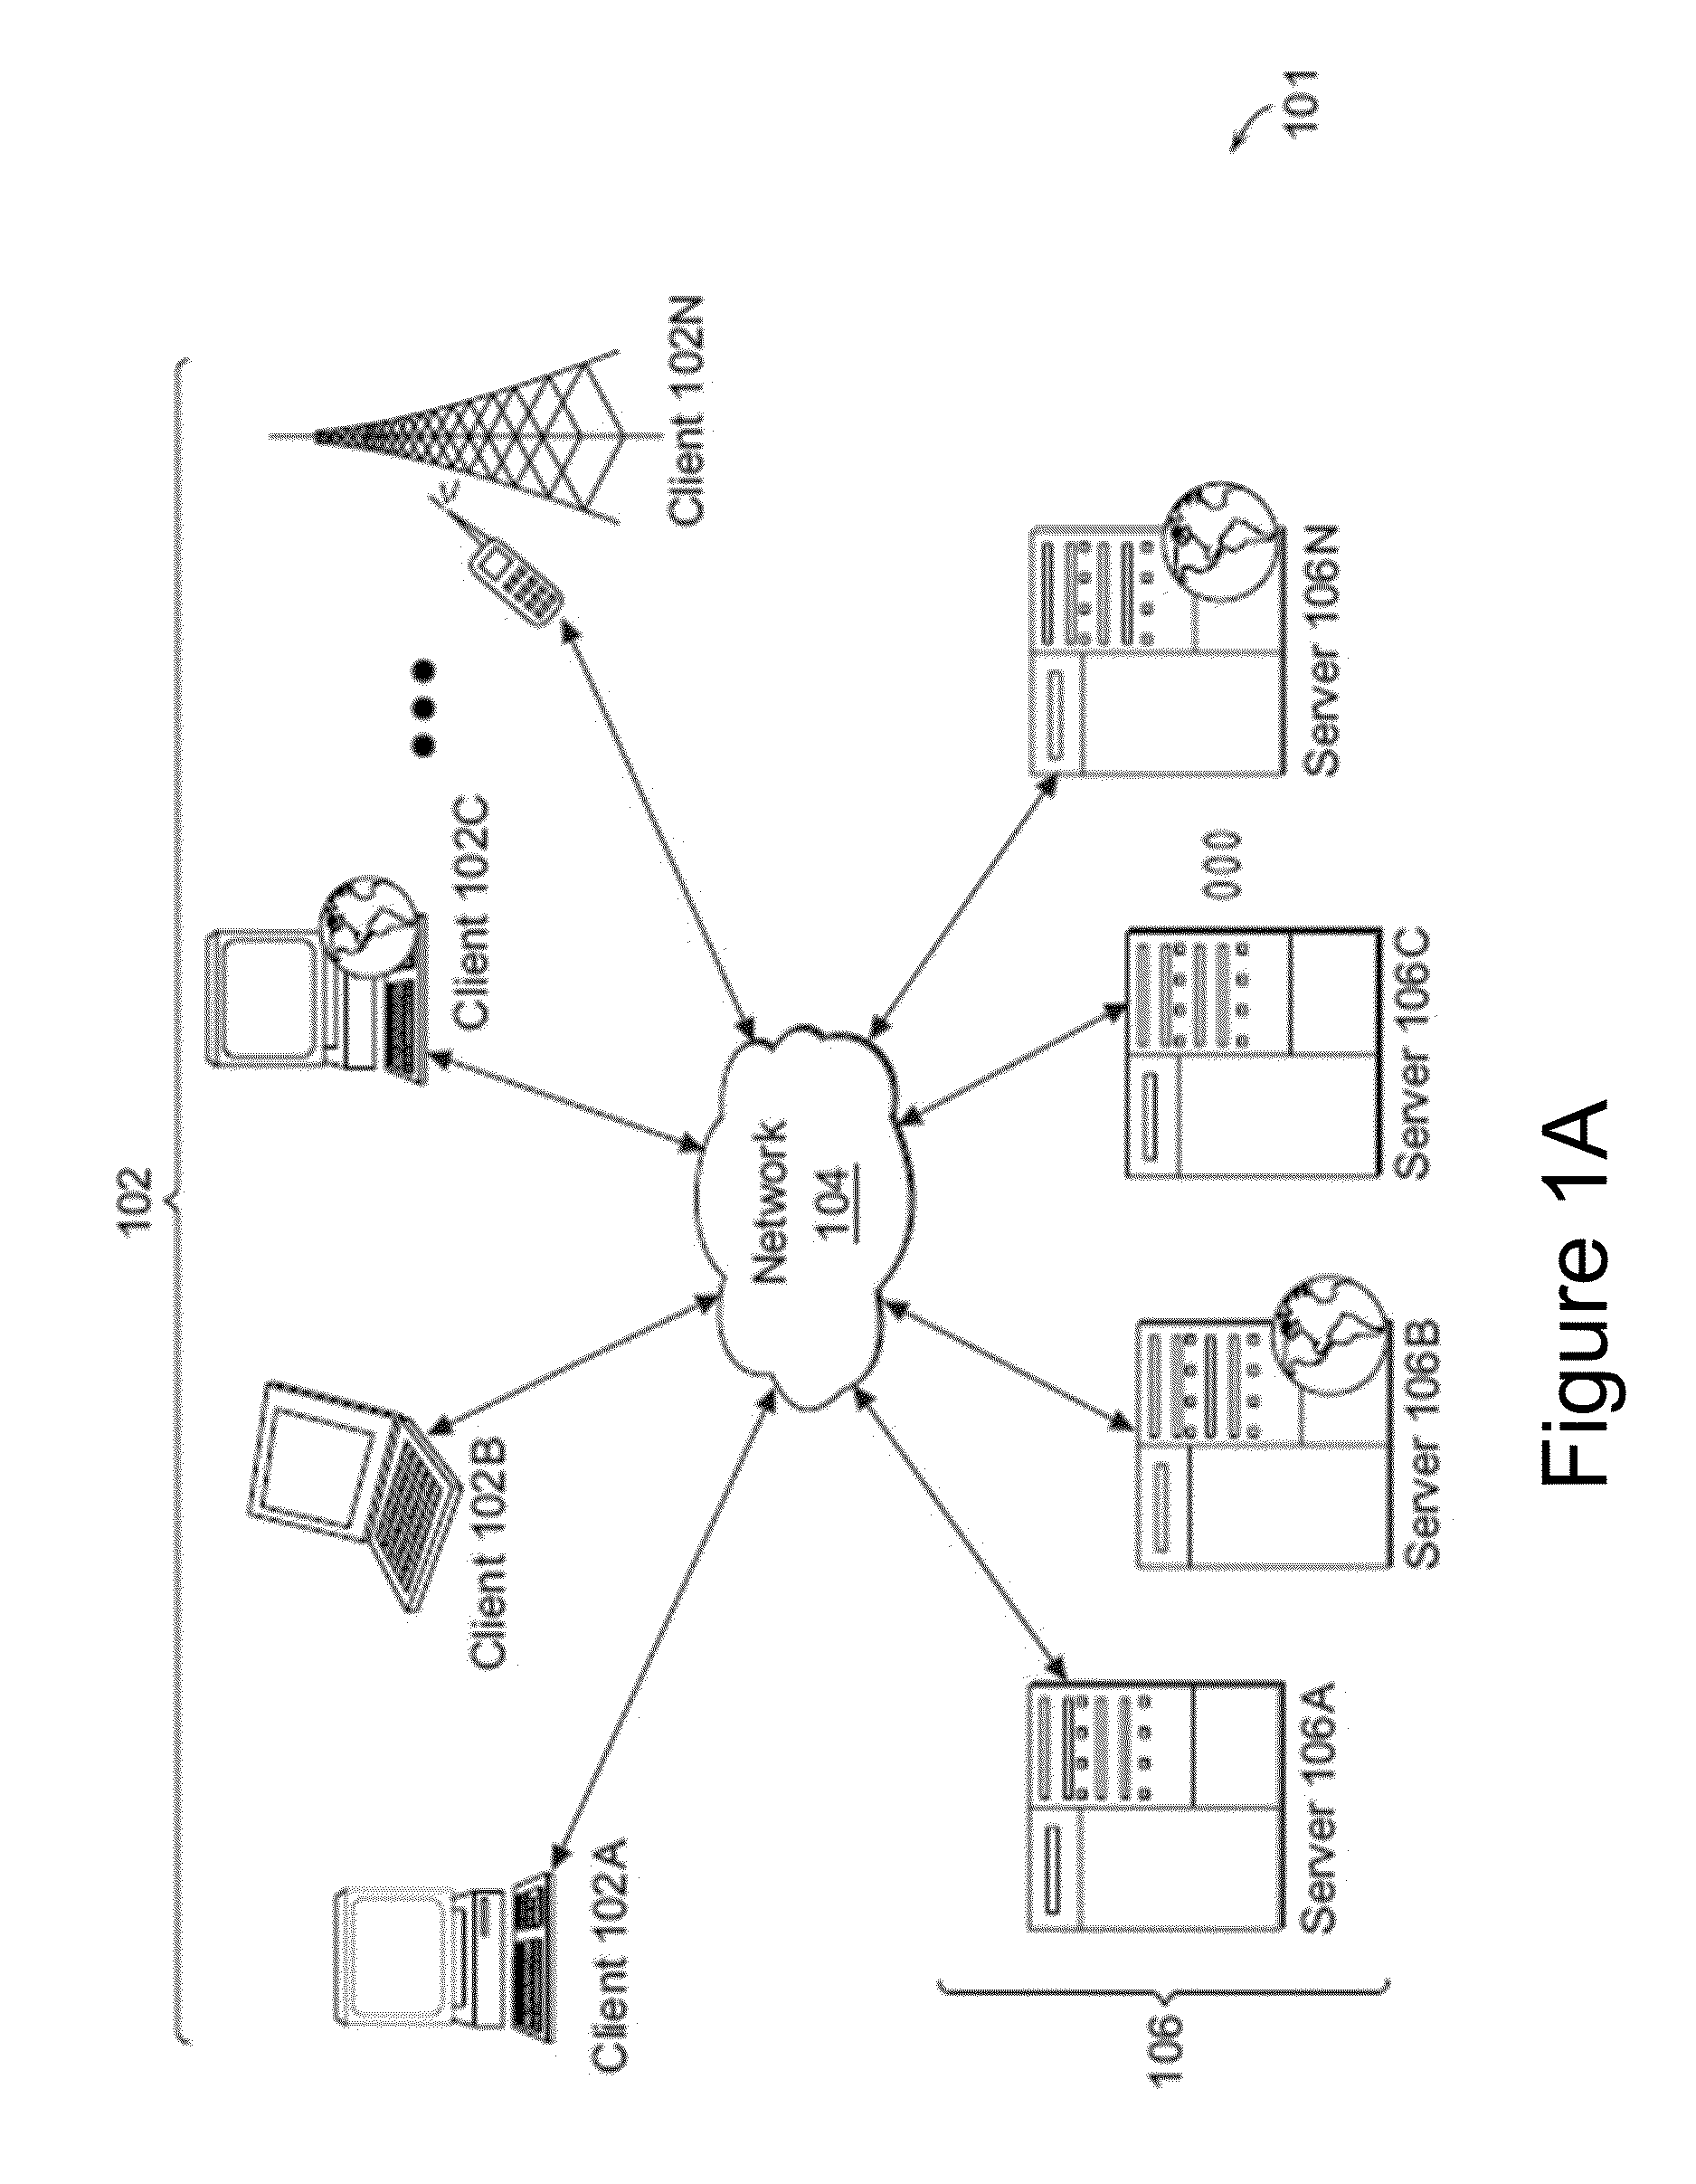 Systems and methods for providing synchronized playback of media